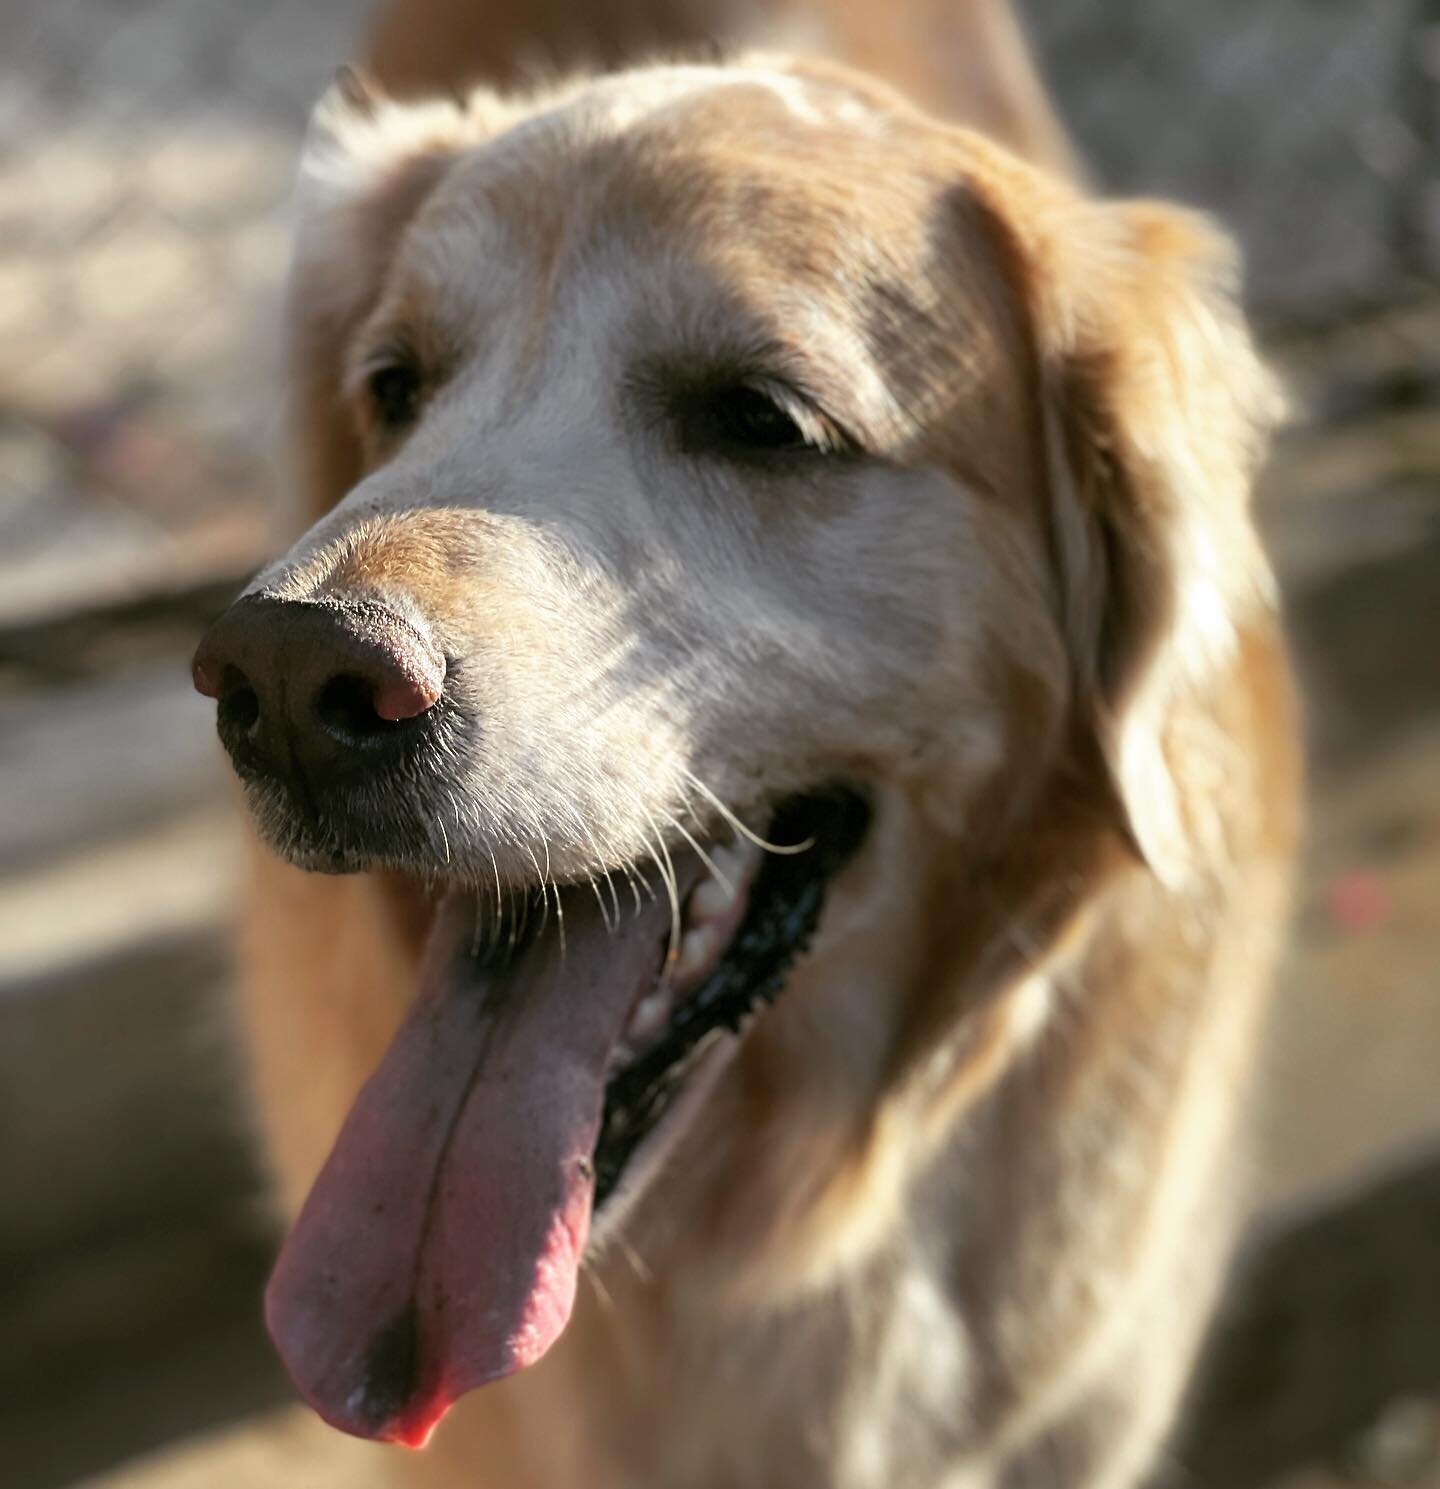 This is Scooby. This is his first appearance on my Insta page. Please welcome him. #dog #dogsofinstagram #doglovers #dogs #retriever